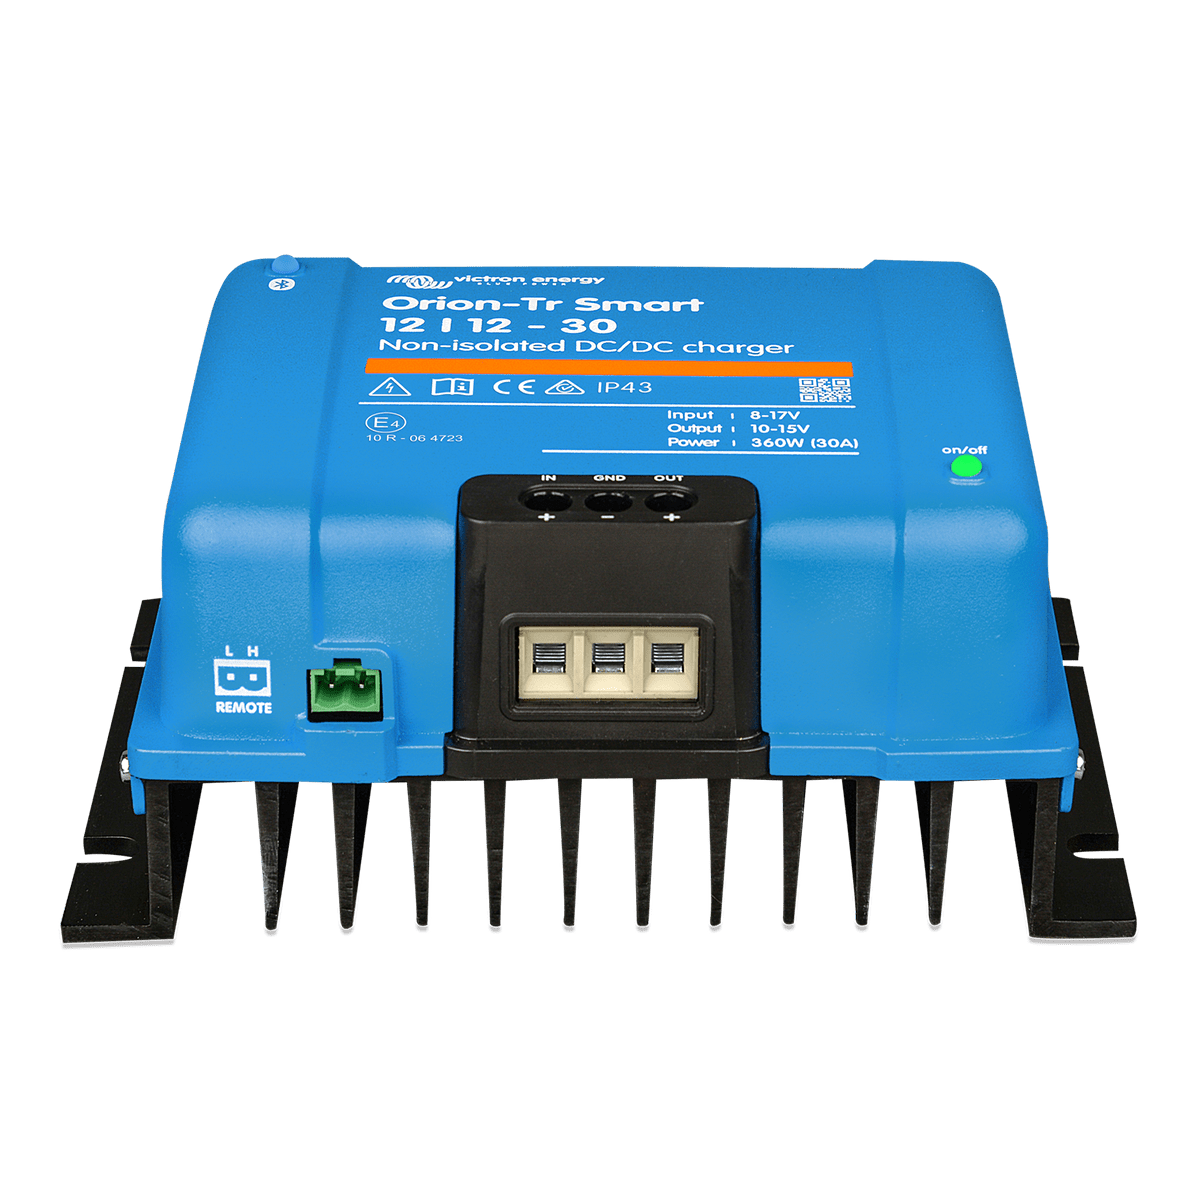 Chargeur DC/DC Orion Smart 12V|12V 30A (360W) non isolé - Pharos Energies